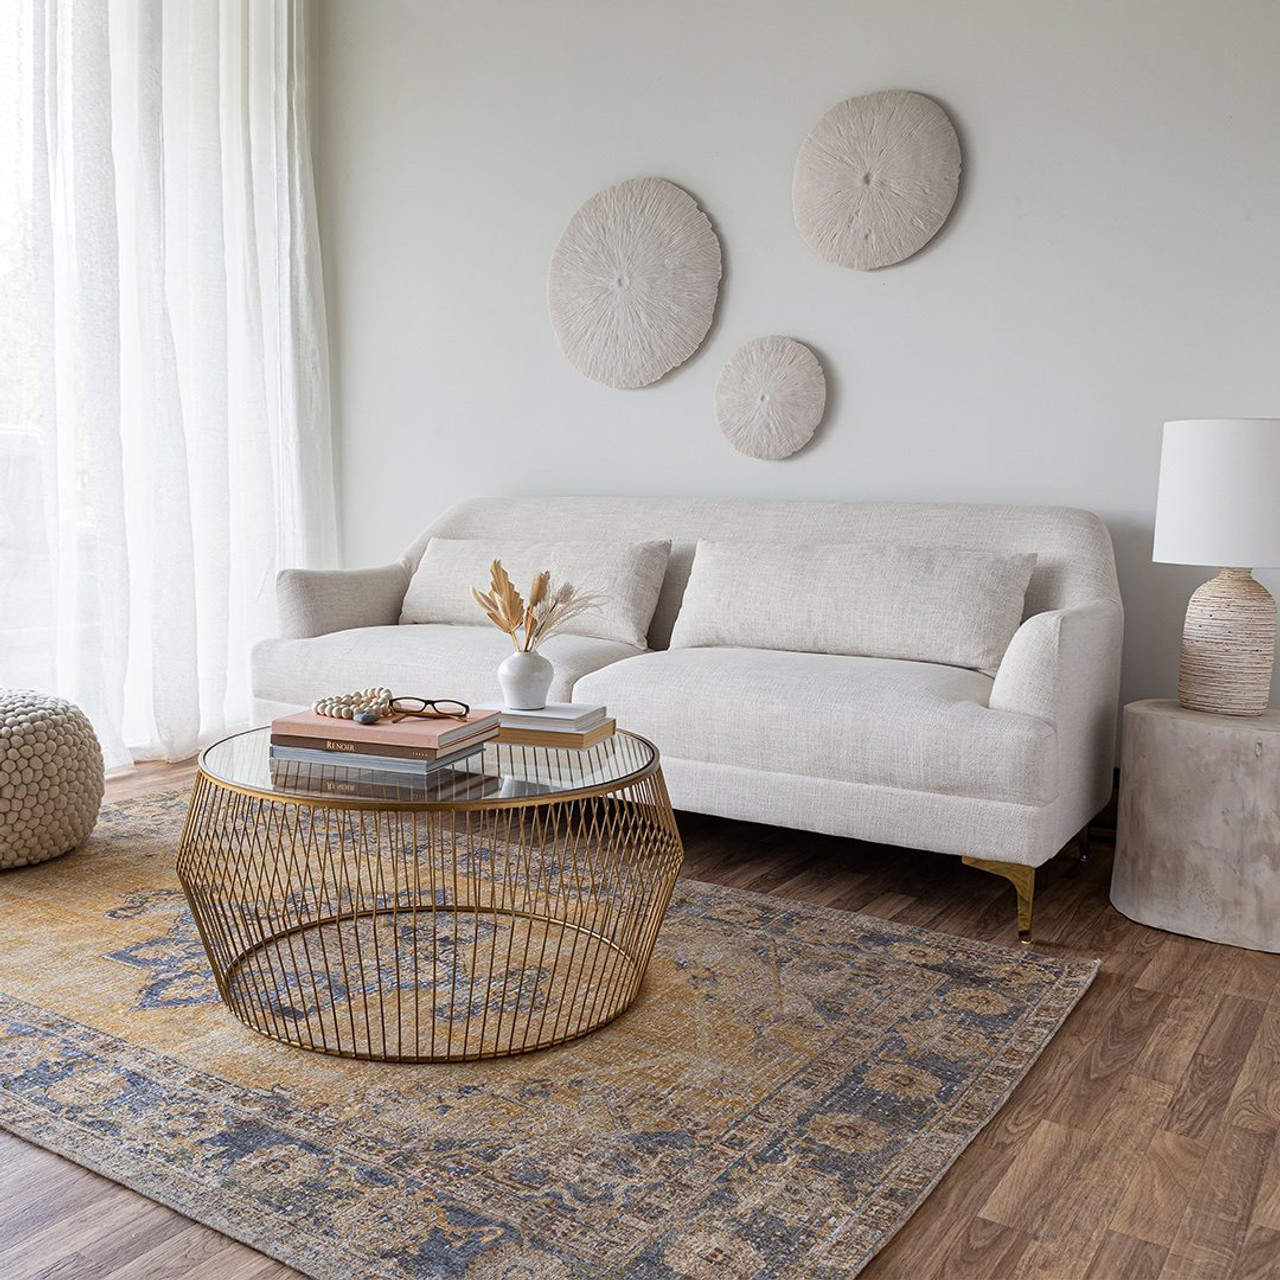 Sand Dollar in living room – Large 1